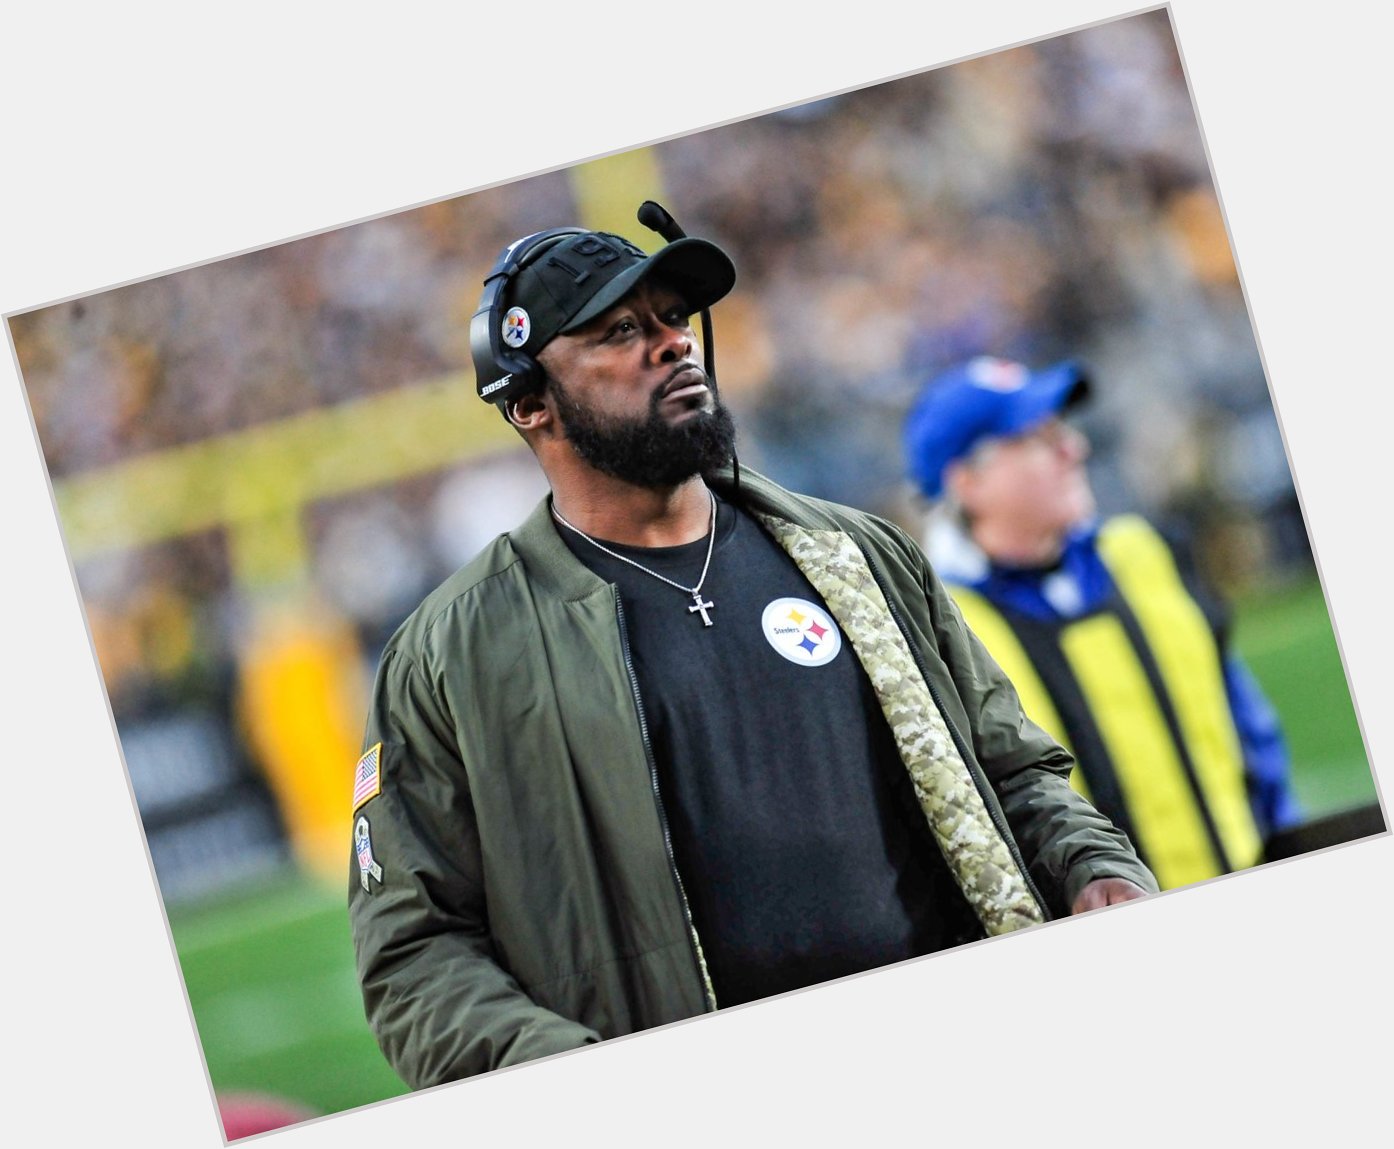 Happy Birthday to coach Mike Tomlin! Hope you had a great day. 